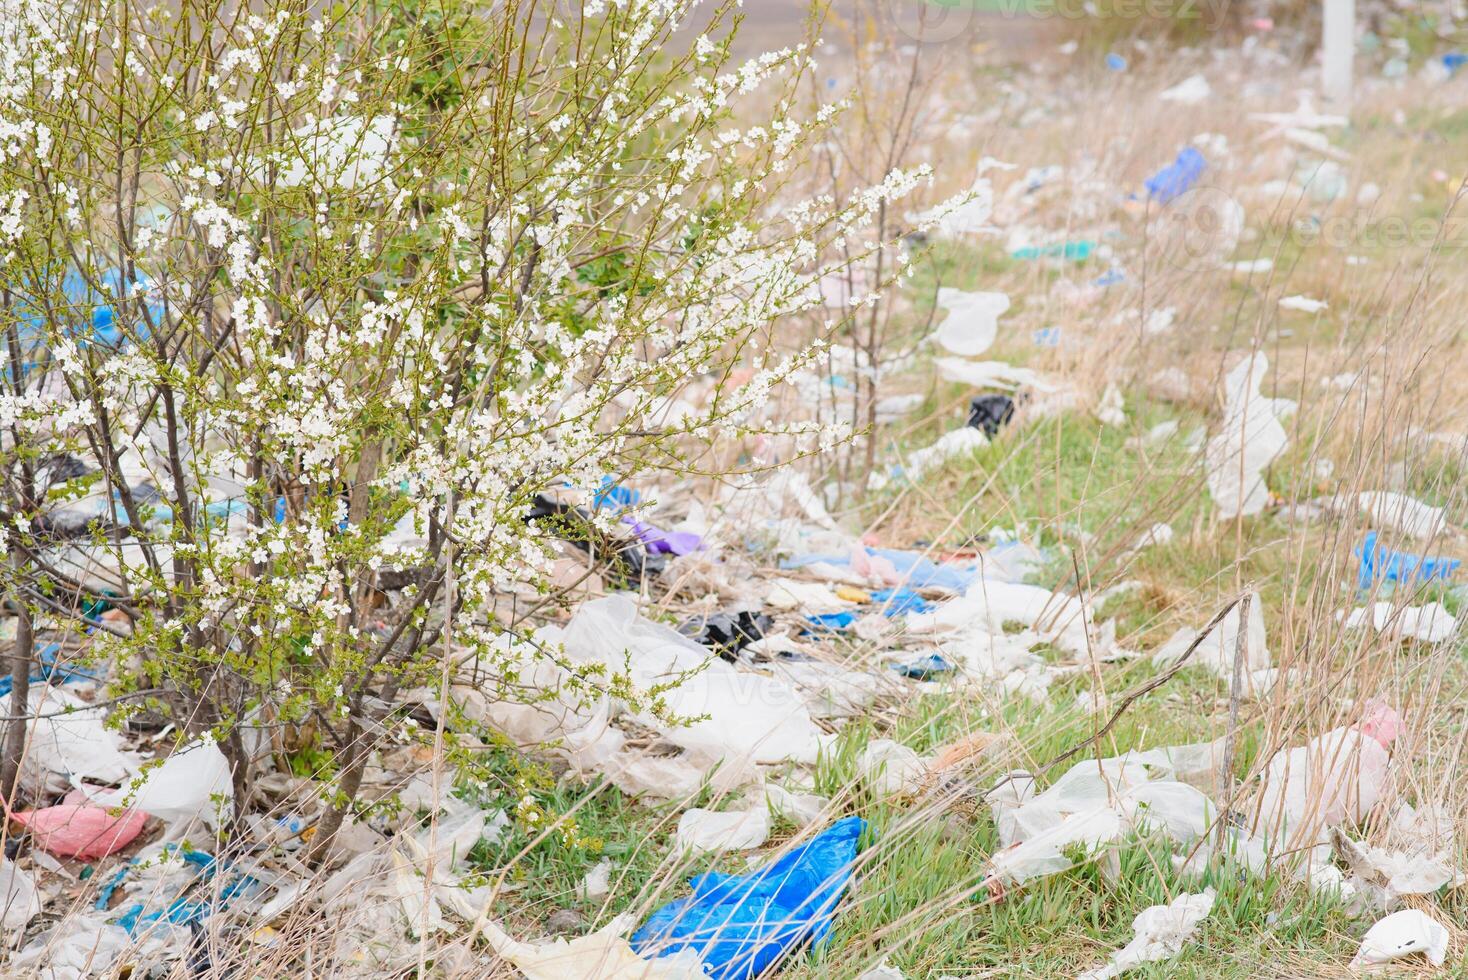 Ecological pollution of nature. Plastic bag tangled in plants against the backdrop of the mountains. Global environmental pollution. Recycling, clearing the land from plastic debris. photo